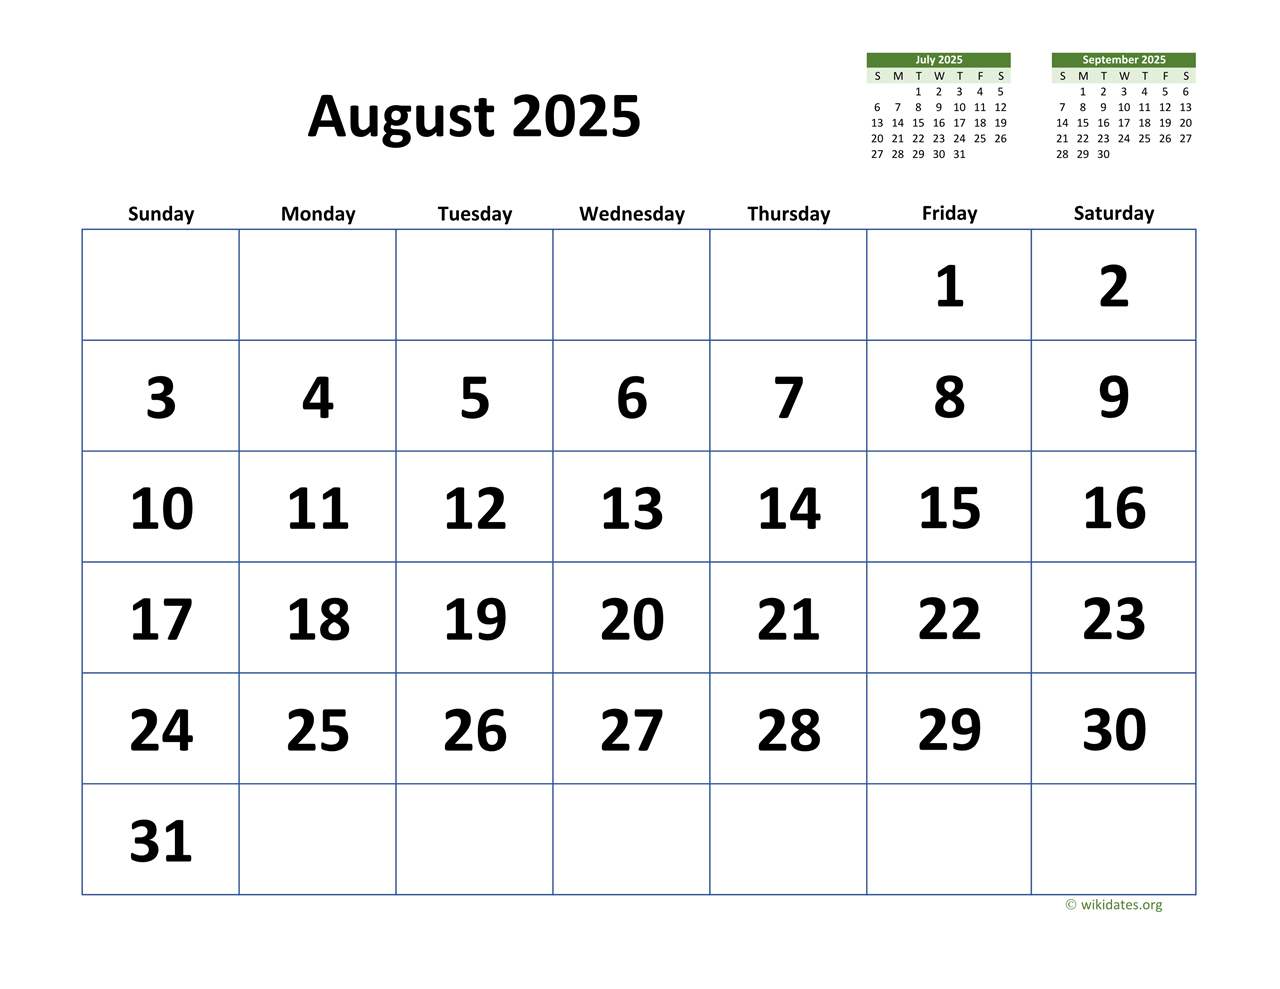 August 2025 Calendar with Extralarge Dates